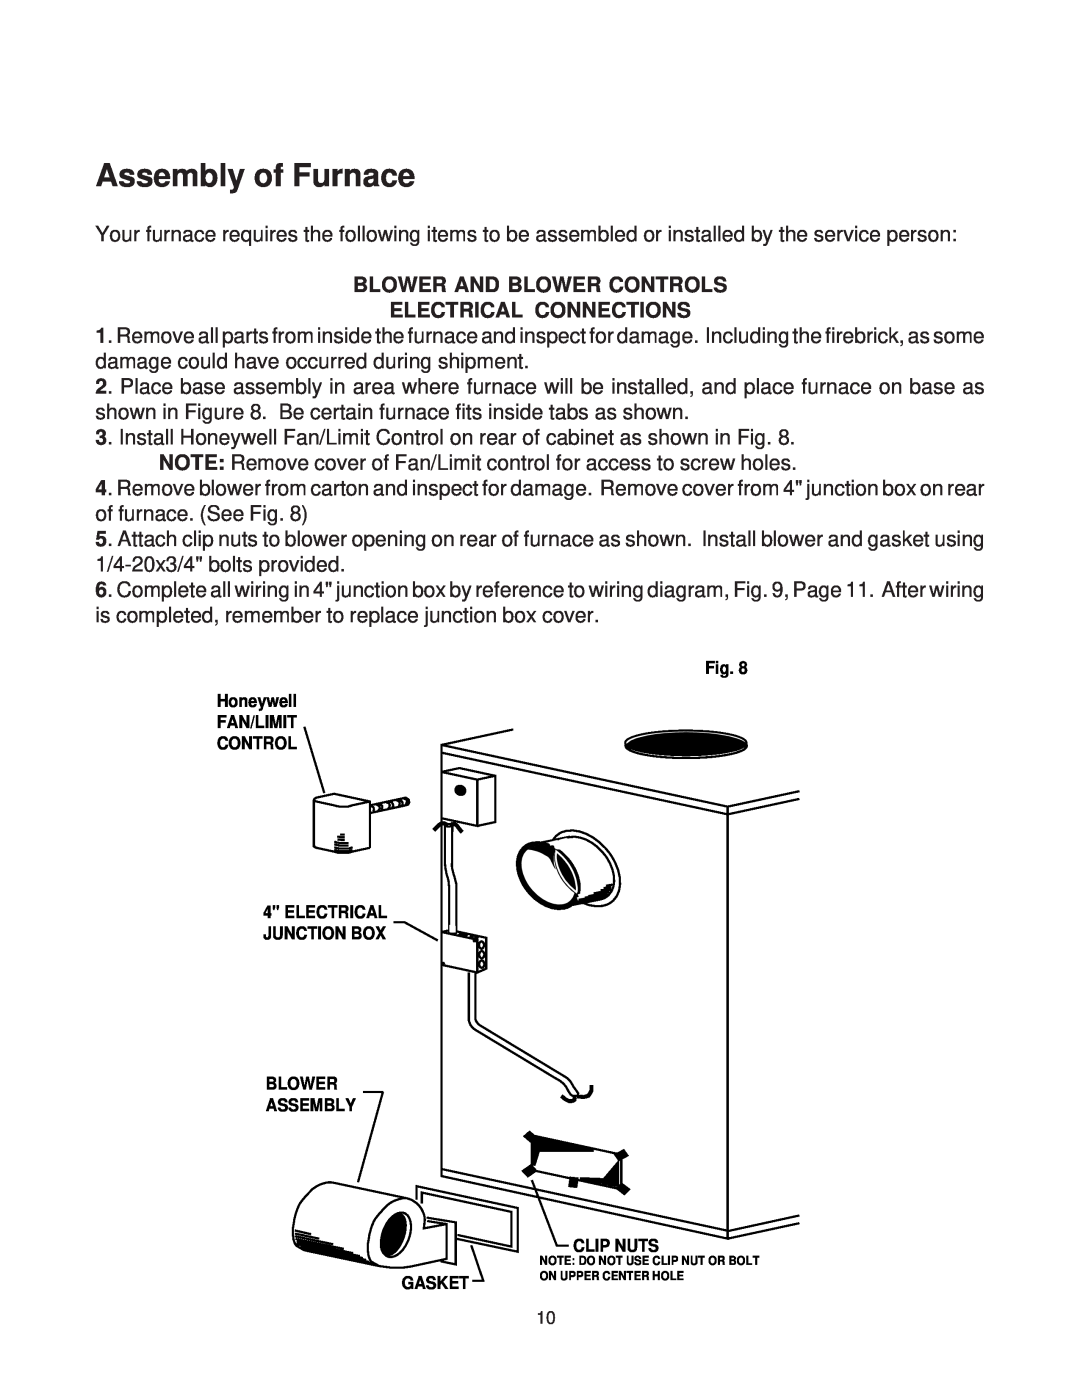 United States Stove 1303, AIR warranty Assembly of Furnace, Blower And Blower Controls Electrical Connections 